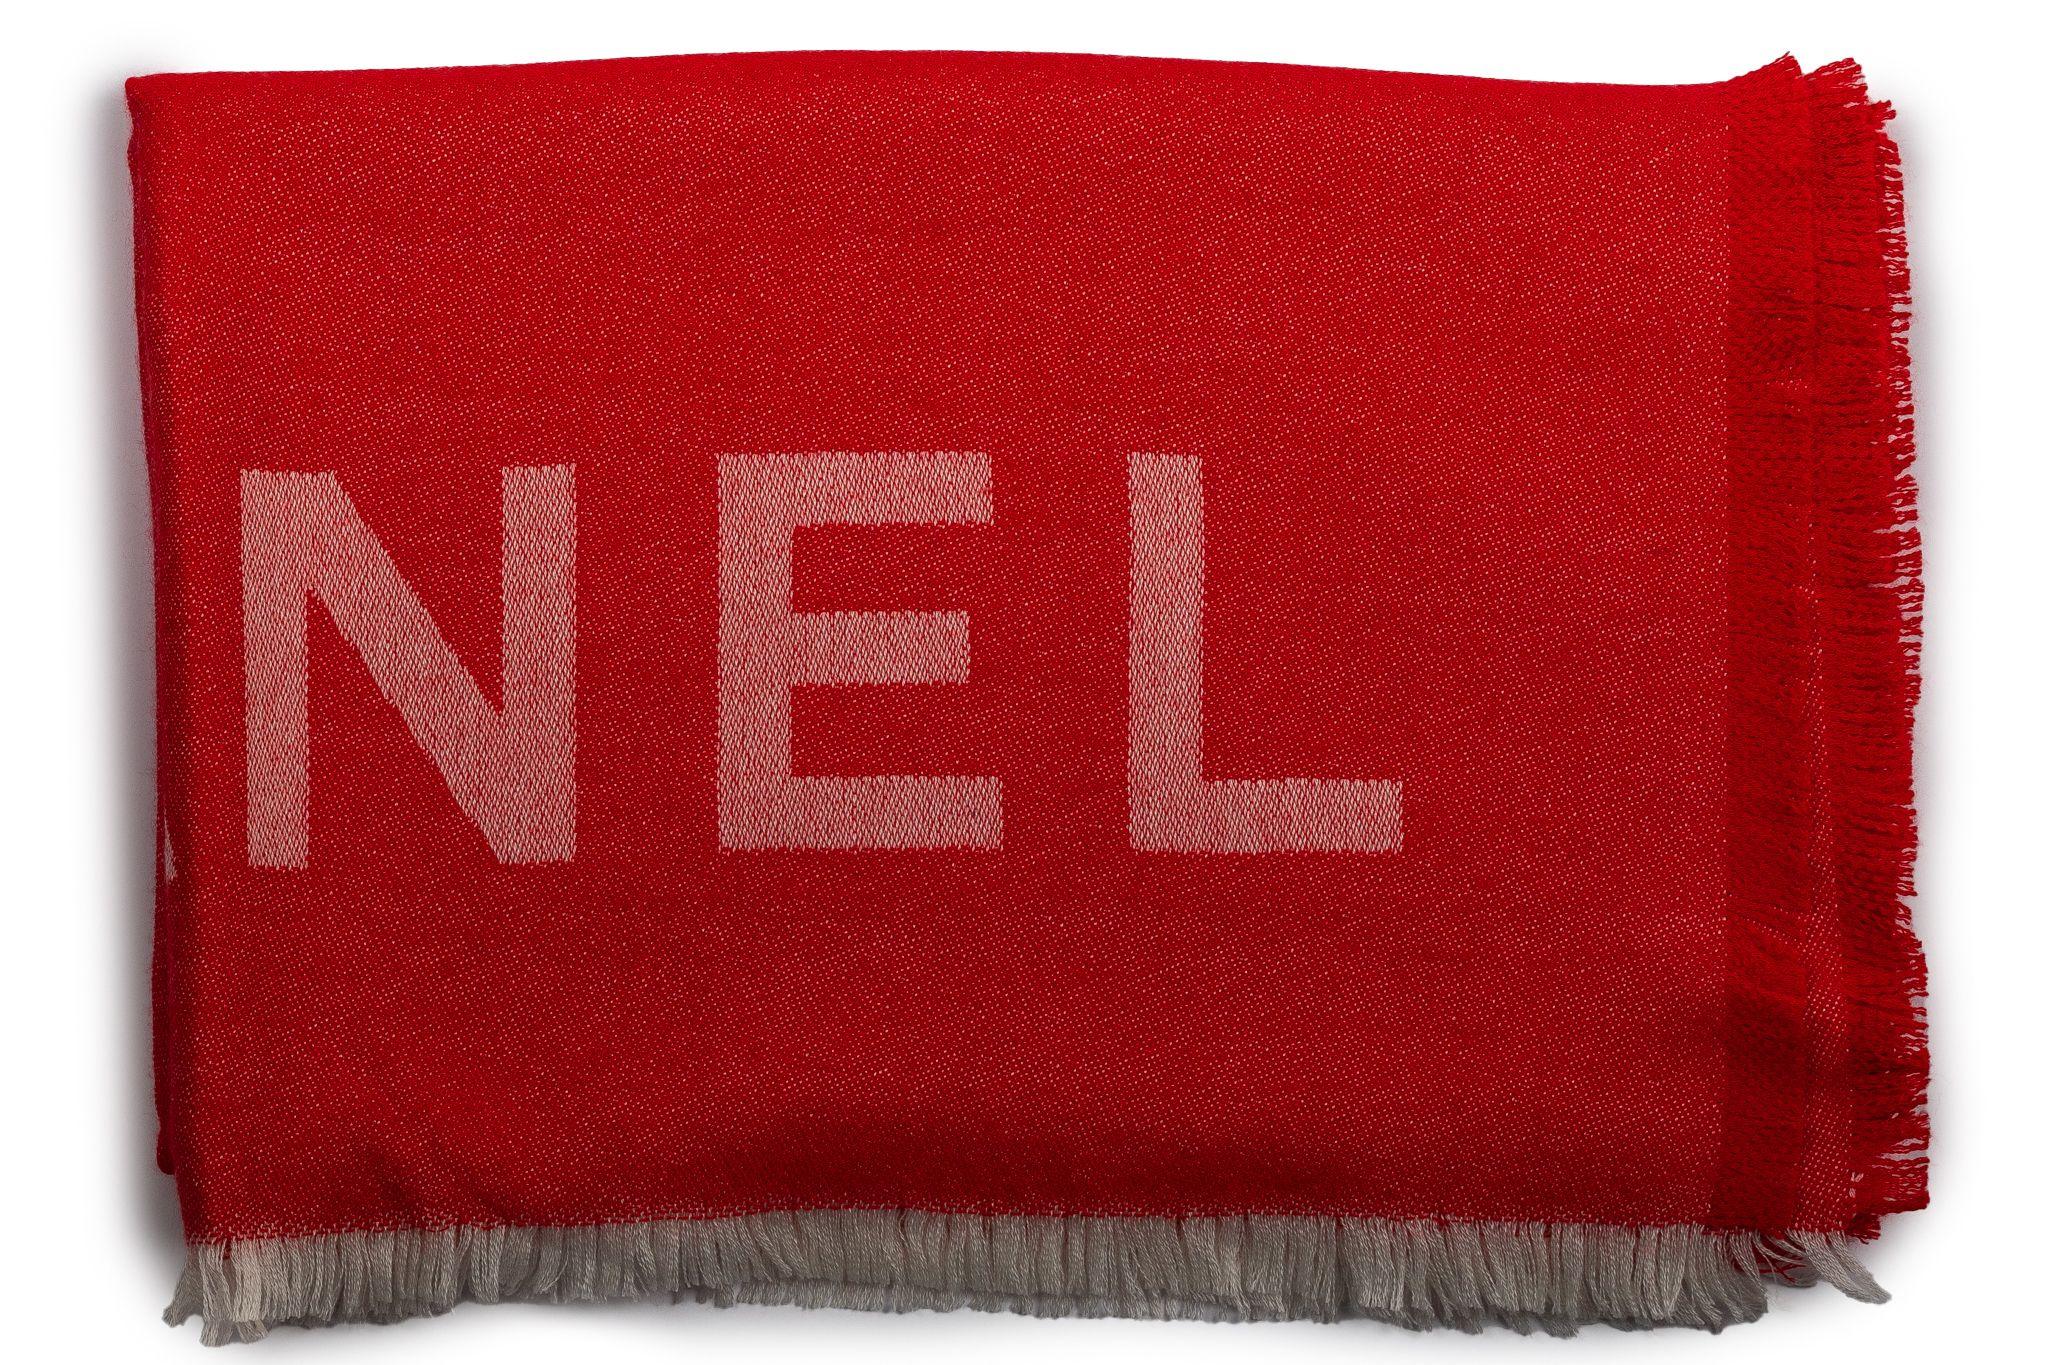 Chanel New Cashmere Shawl in Red For Sale 2